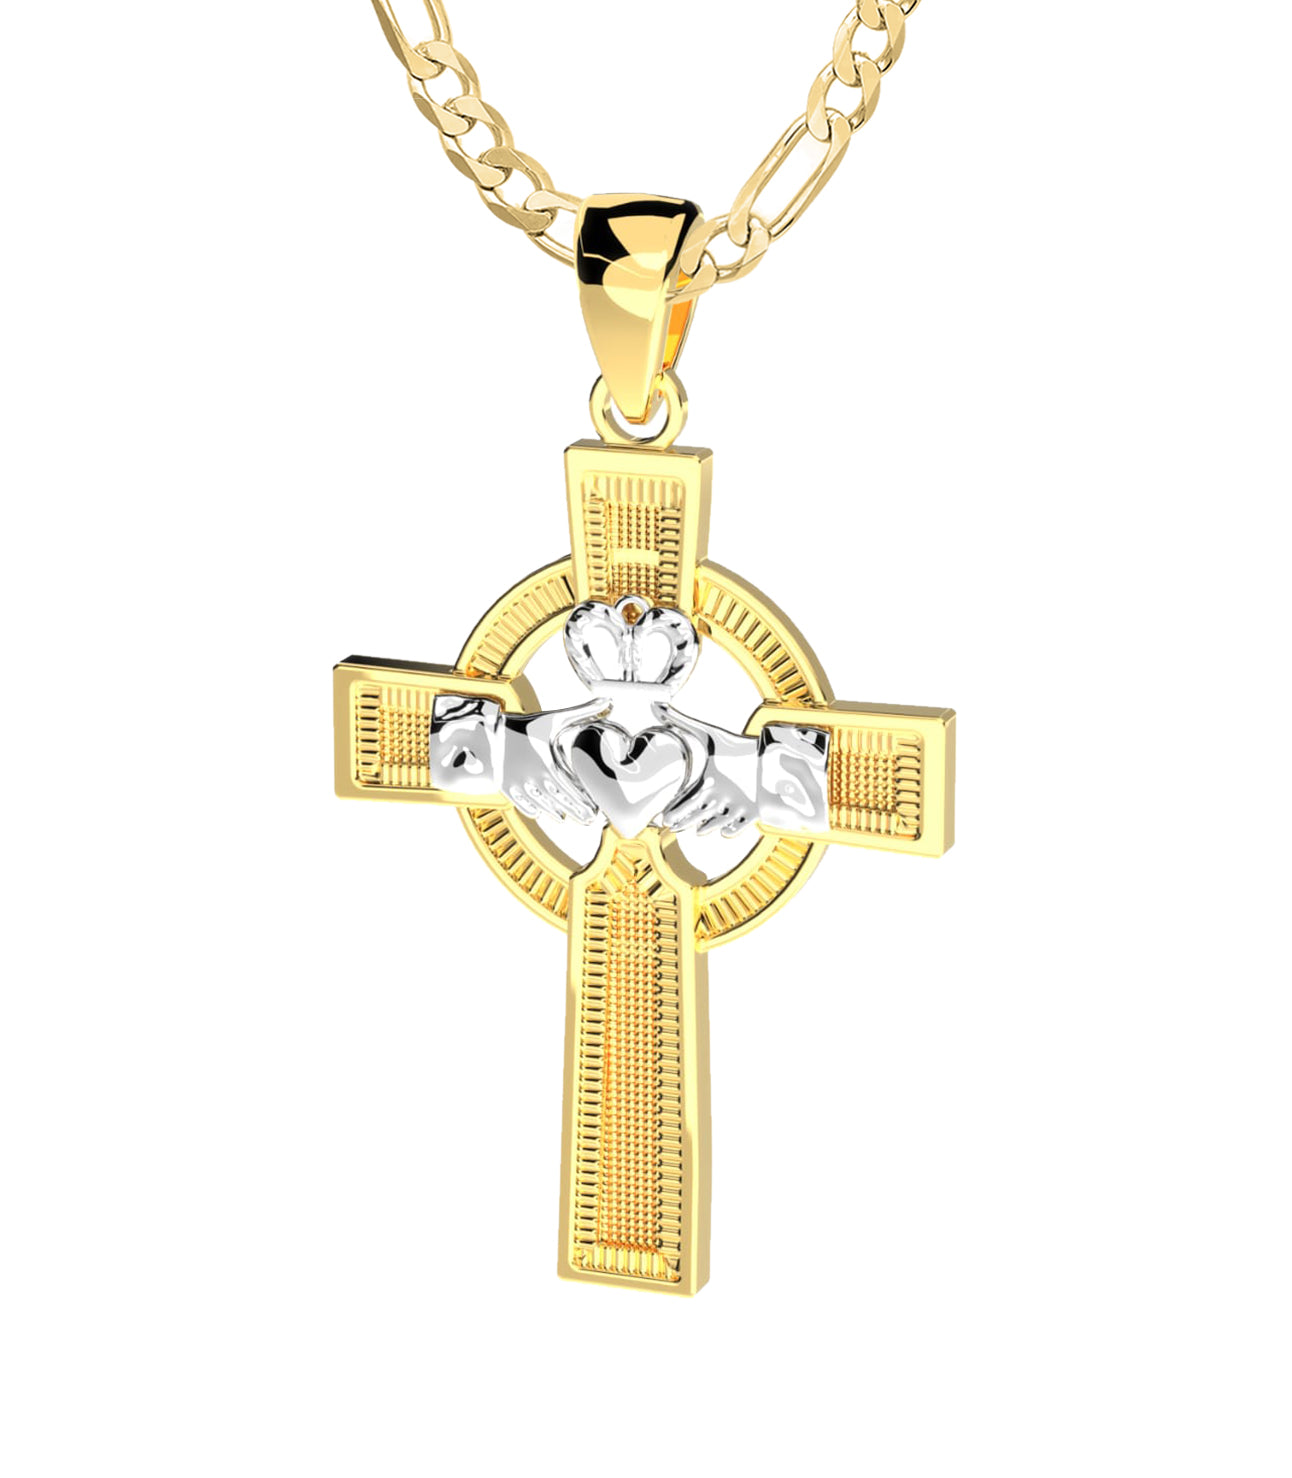 Finejewelers 14k Claddagh Cross Pendant Necklace Simulated Emerald Heart w/ Chain | CG17505 | Finejewelers.com